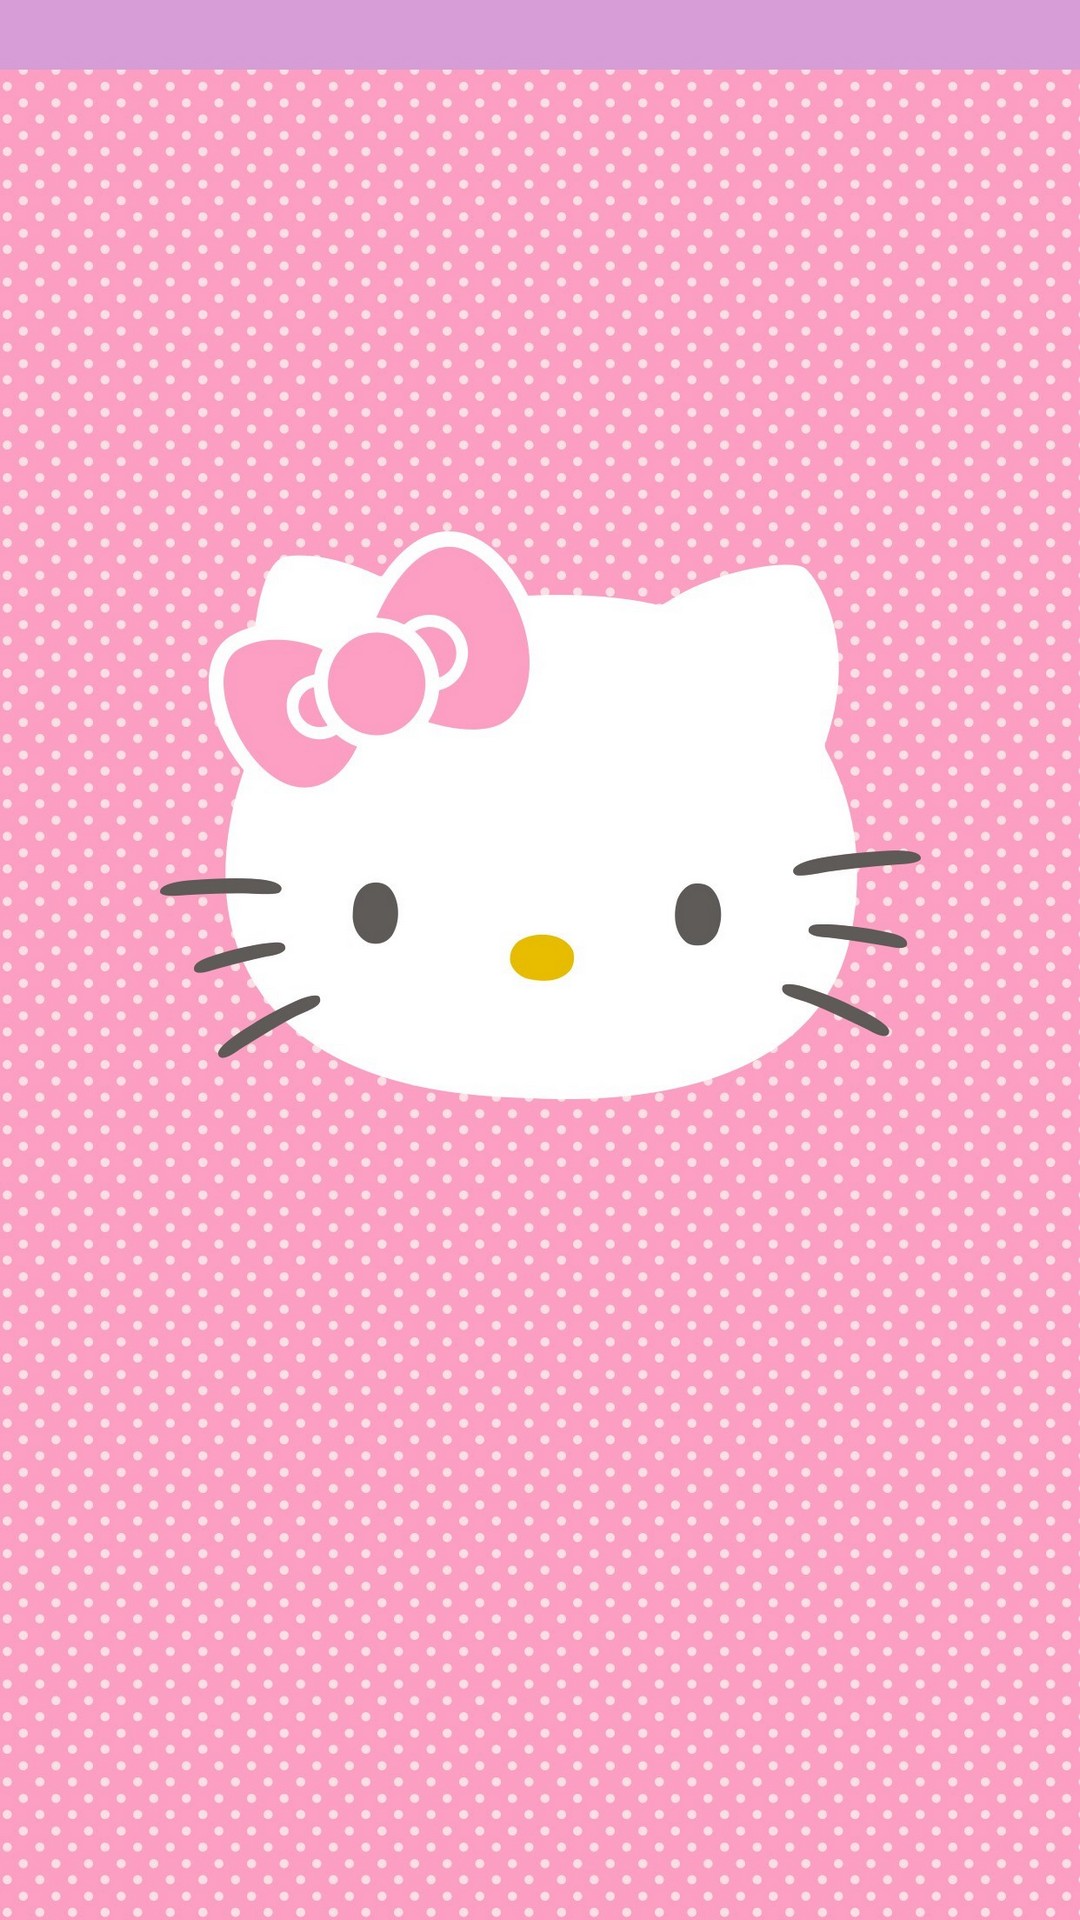 Wallpaper Kitty iPhone with image resolution 1080x1920 pixel. You can use this wallpaper as background for your desktop Computer Screensavers, Android or iPhone smartphones